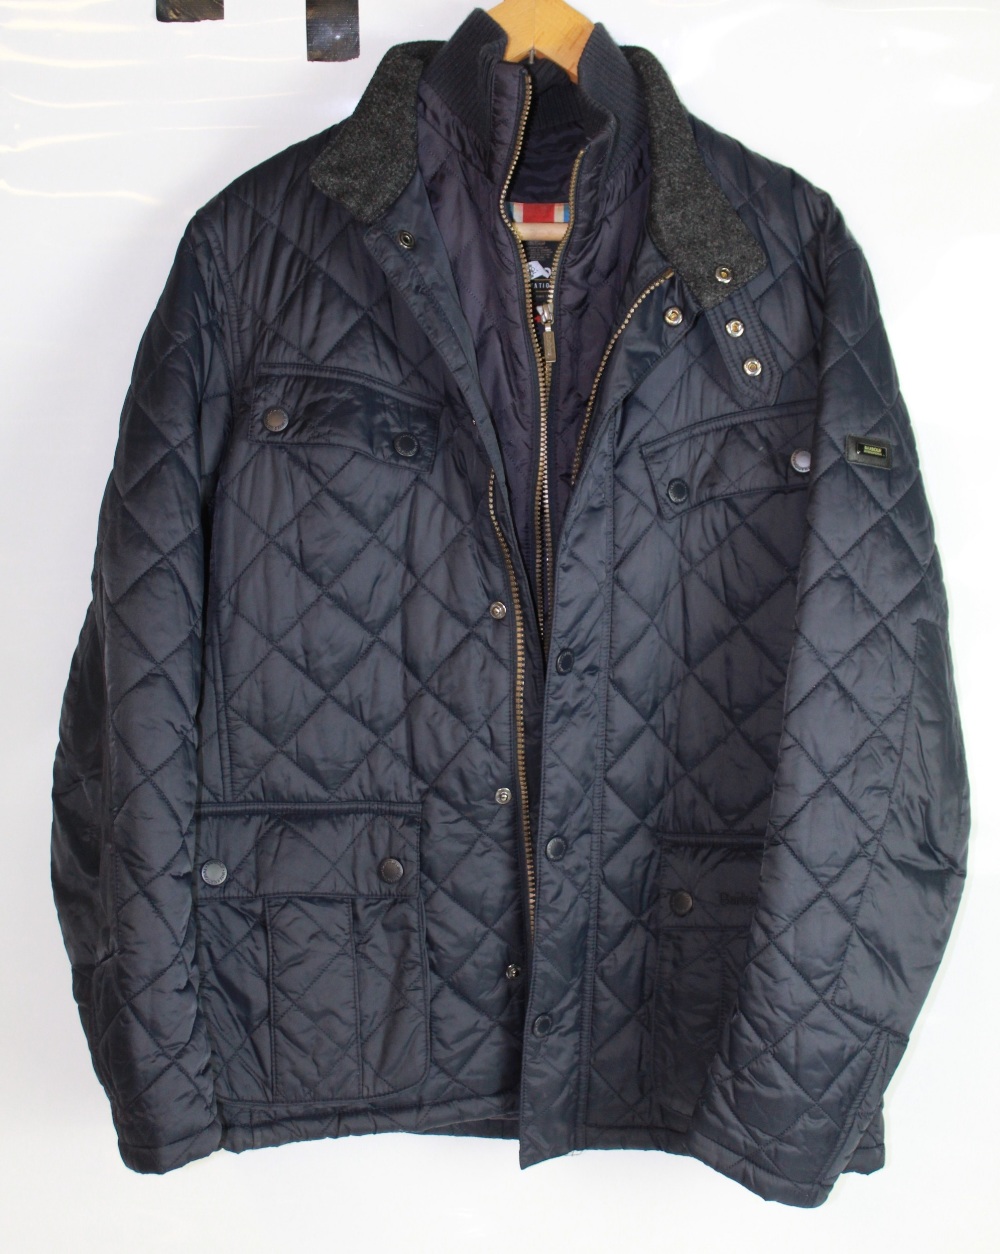 Barbour quilted coat in navy blue, 'windshield quilt', size L